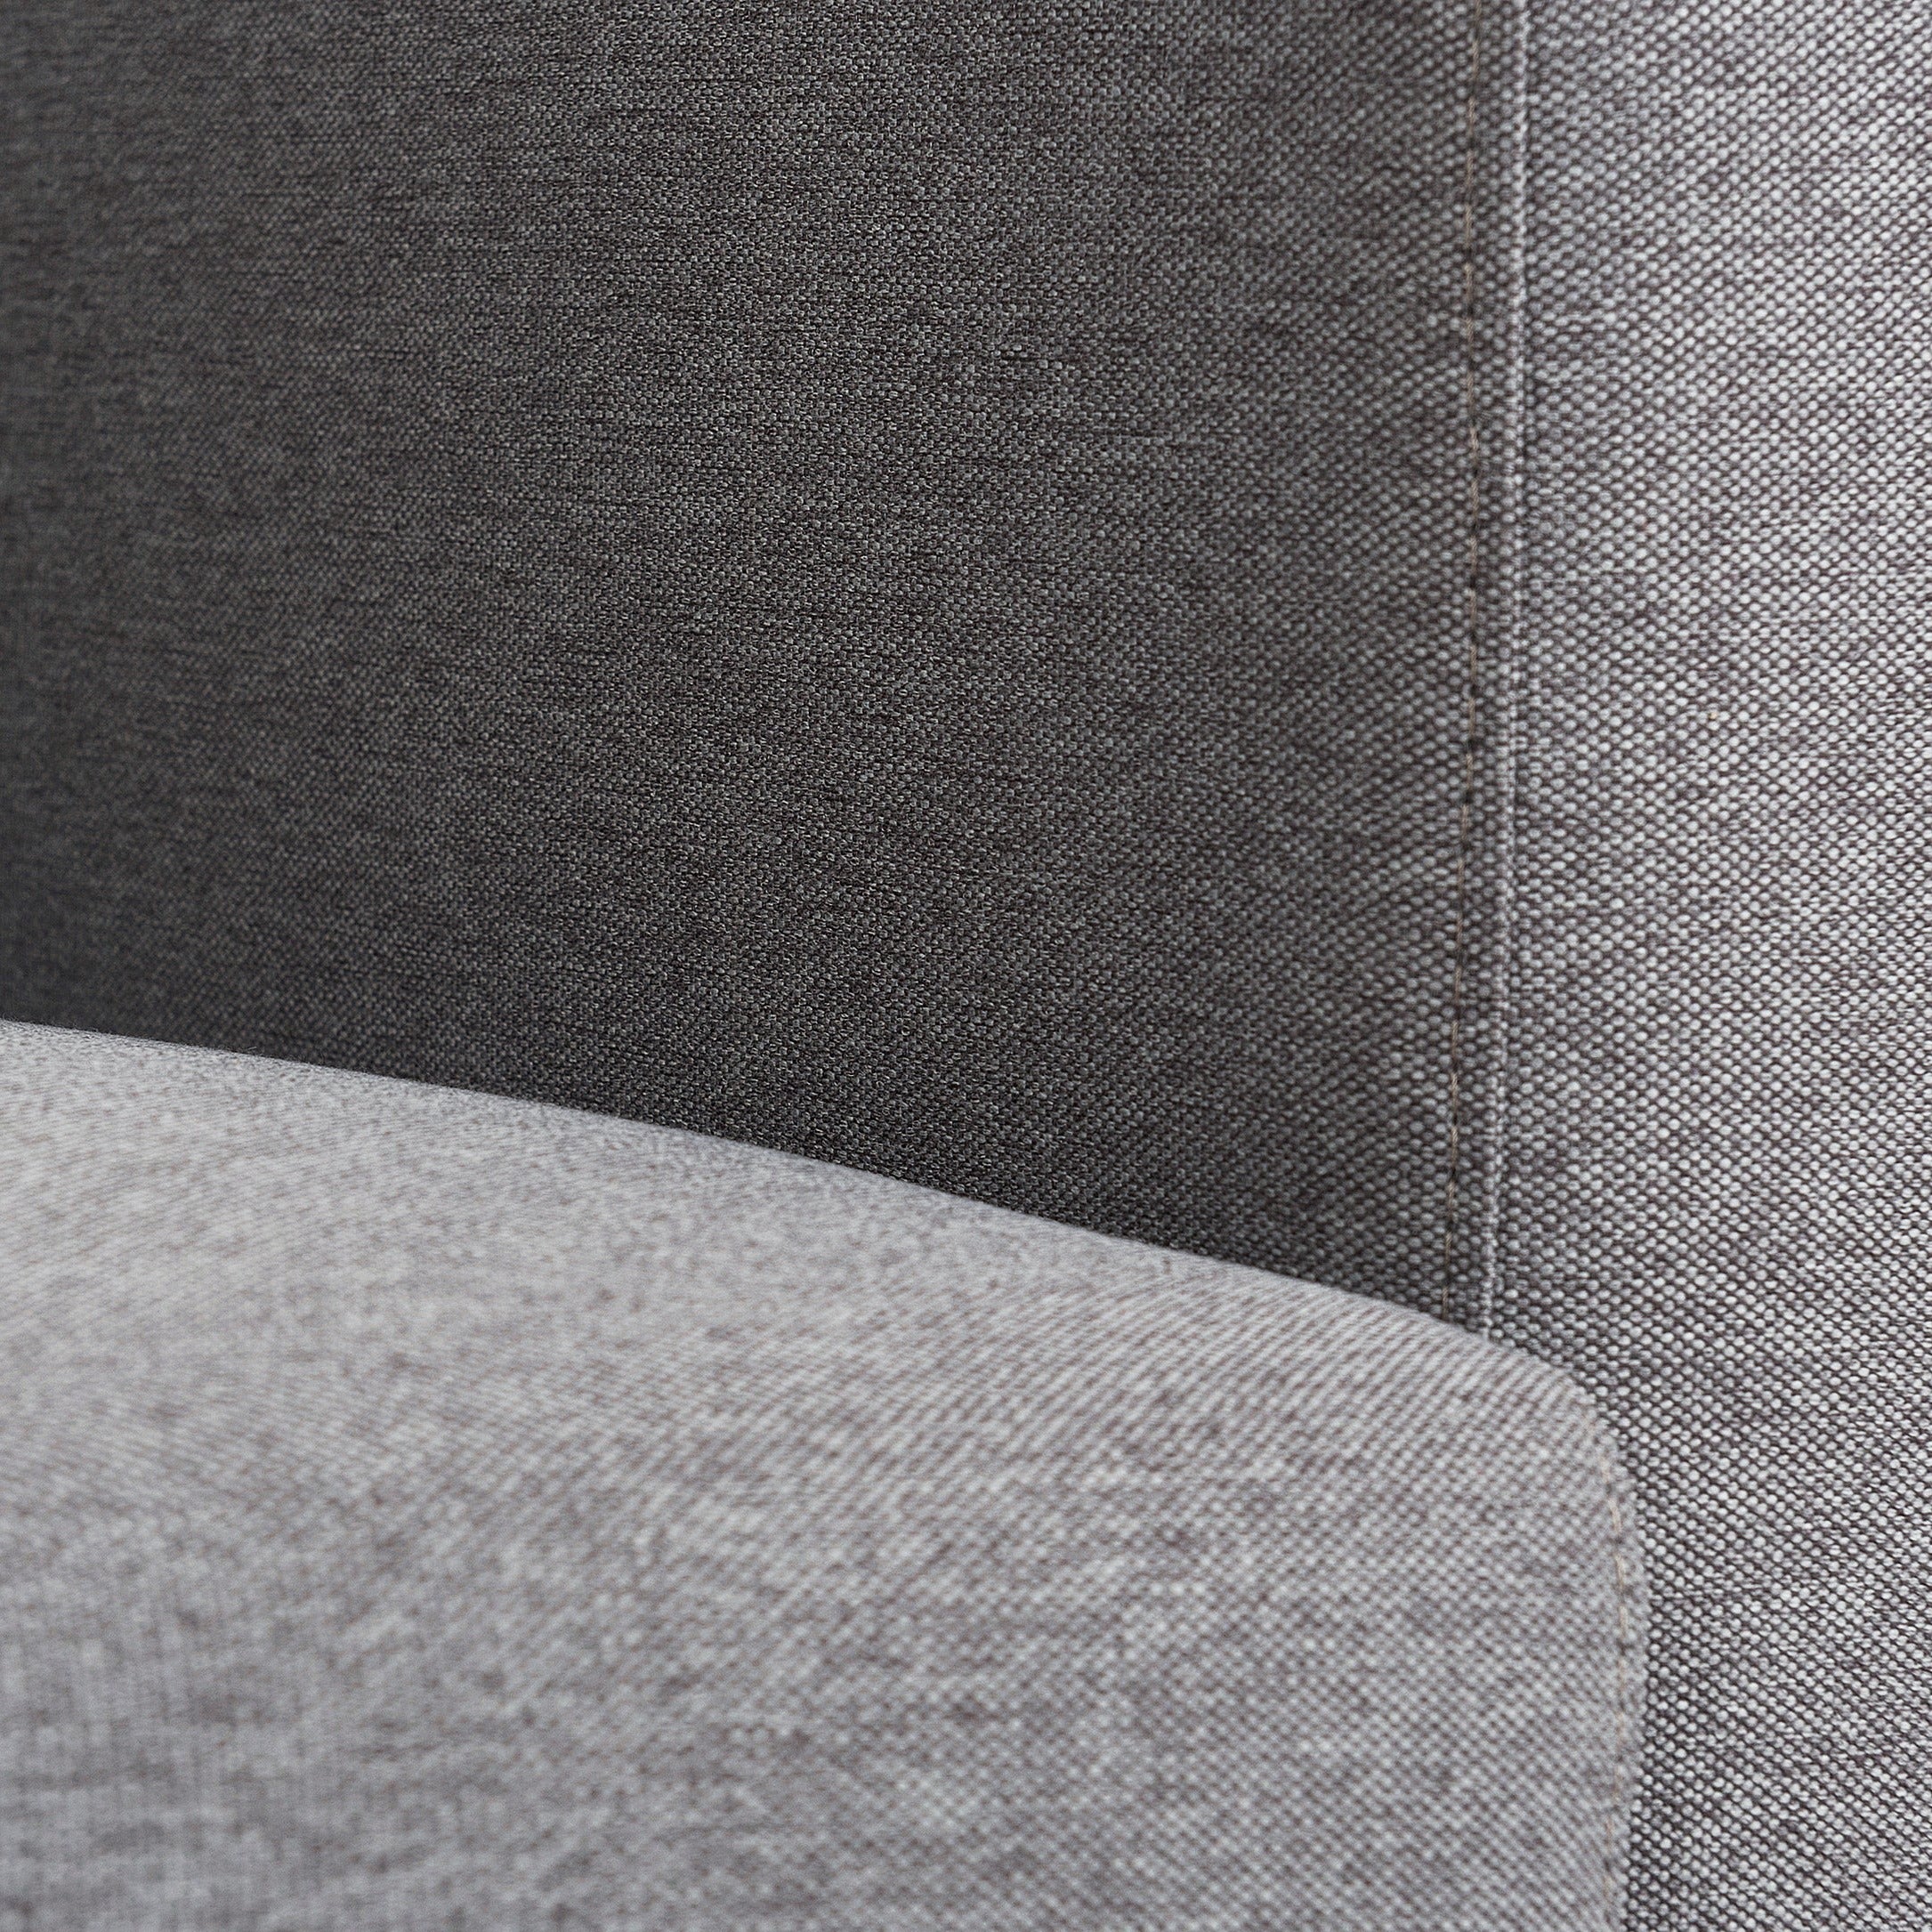 LOVER Sofa upholstery colour grey crop view